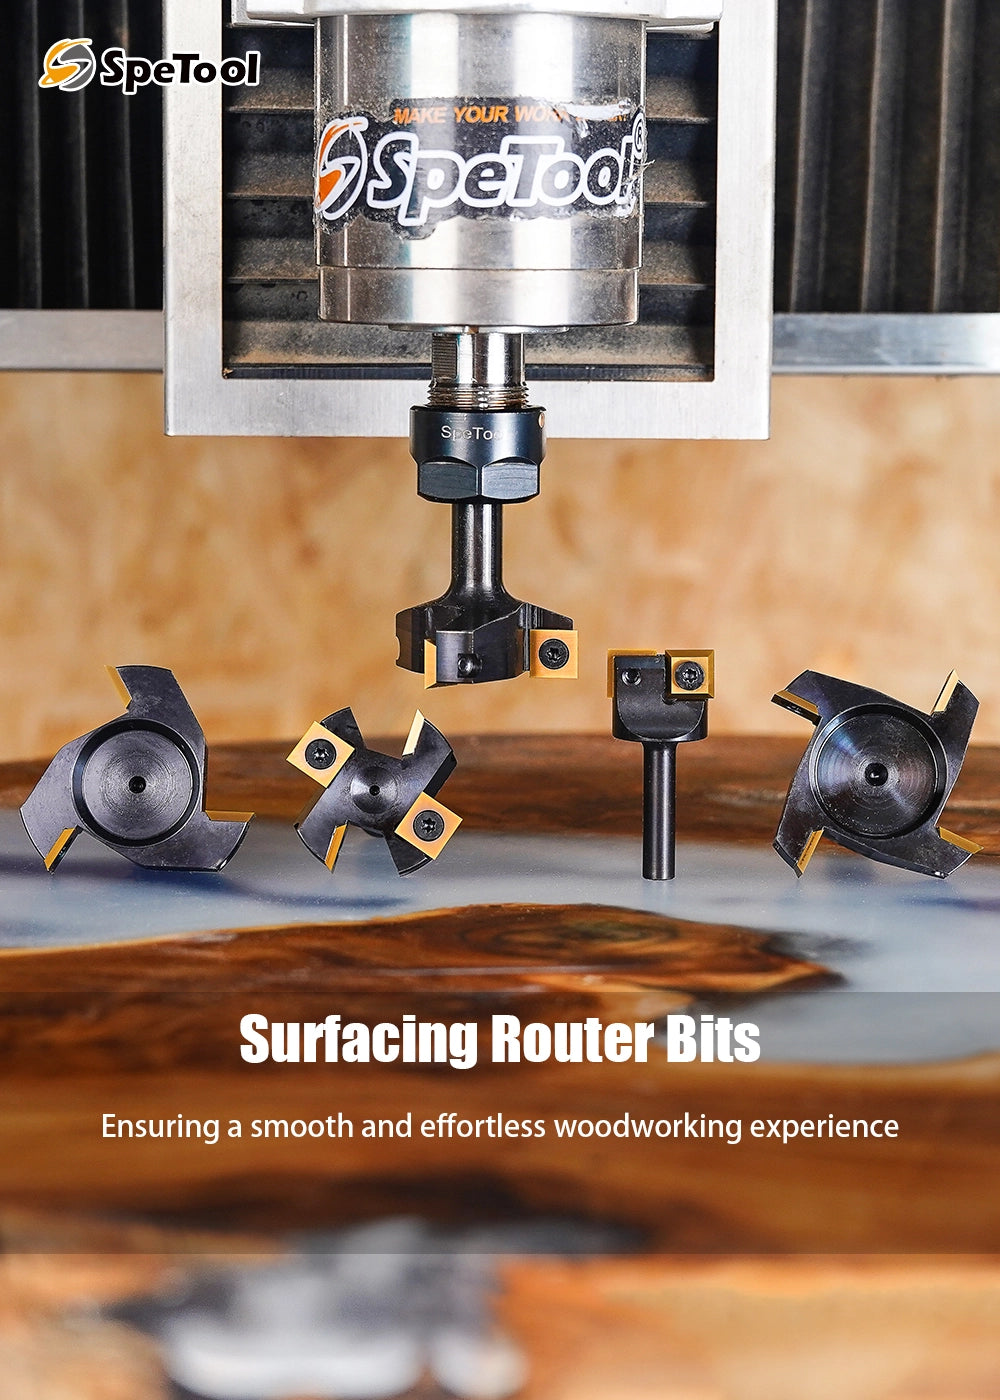 SpeTool surfacing router bits